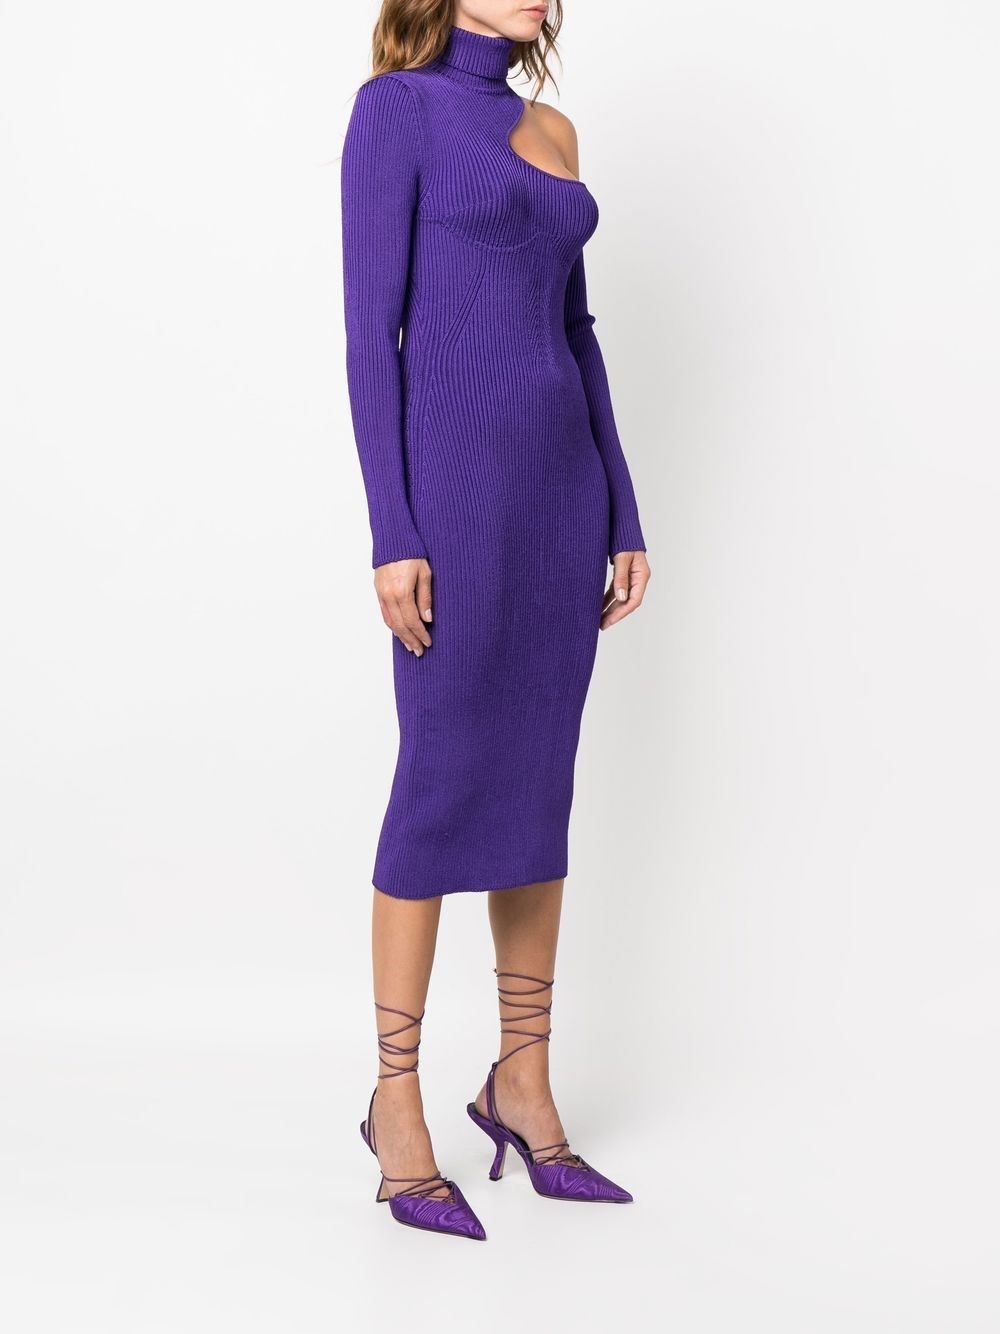 Tom ford Dress available on Monti Boutique - 50101